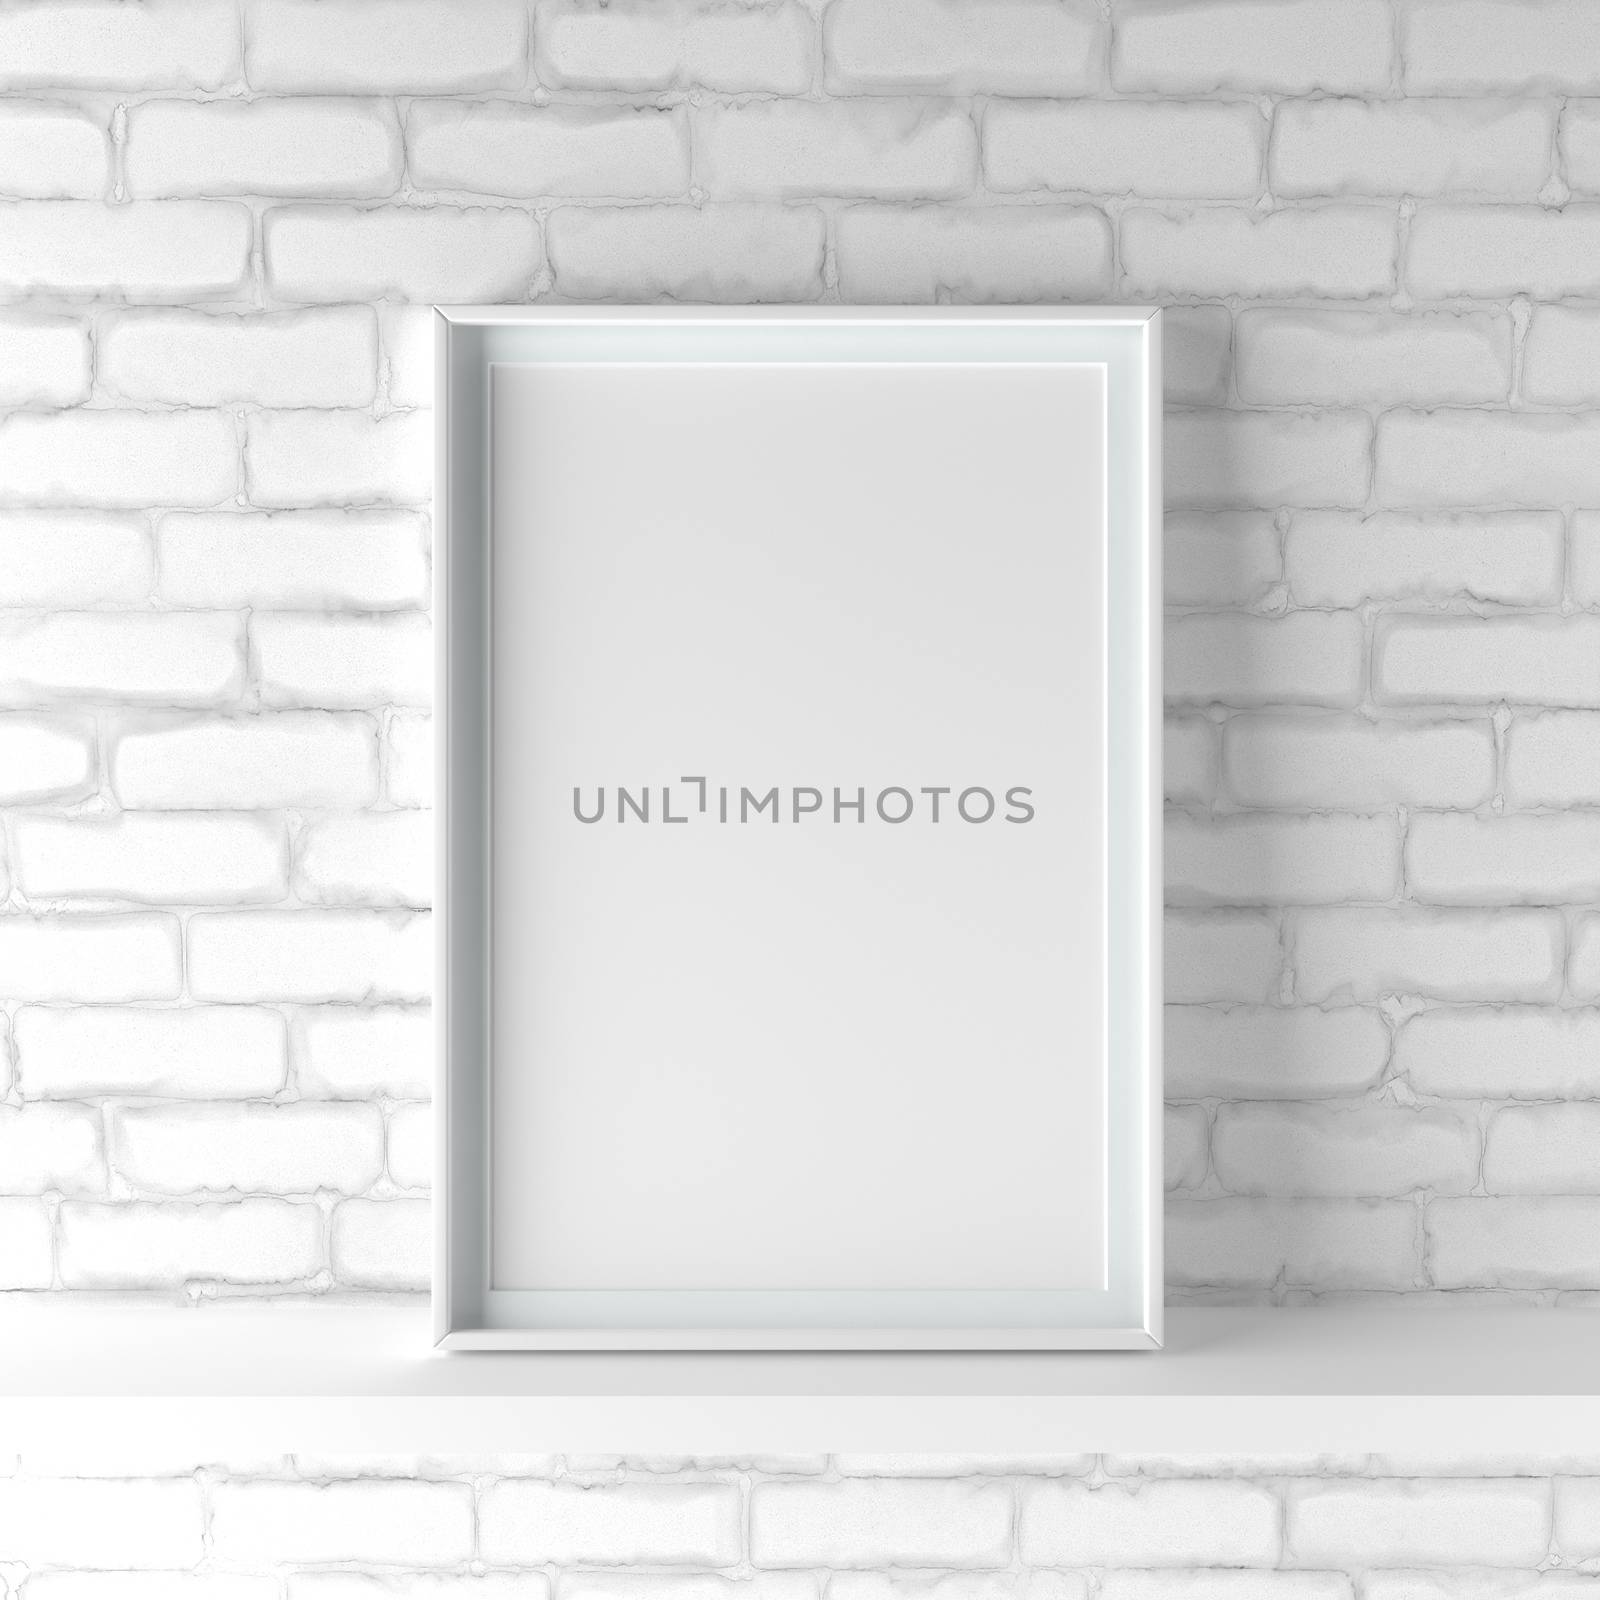 Minimalistic portrait picture frame standing on white painted br by adamr